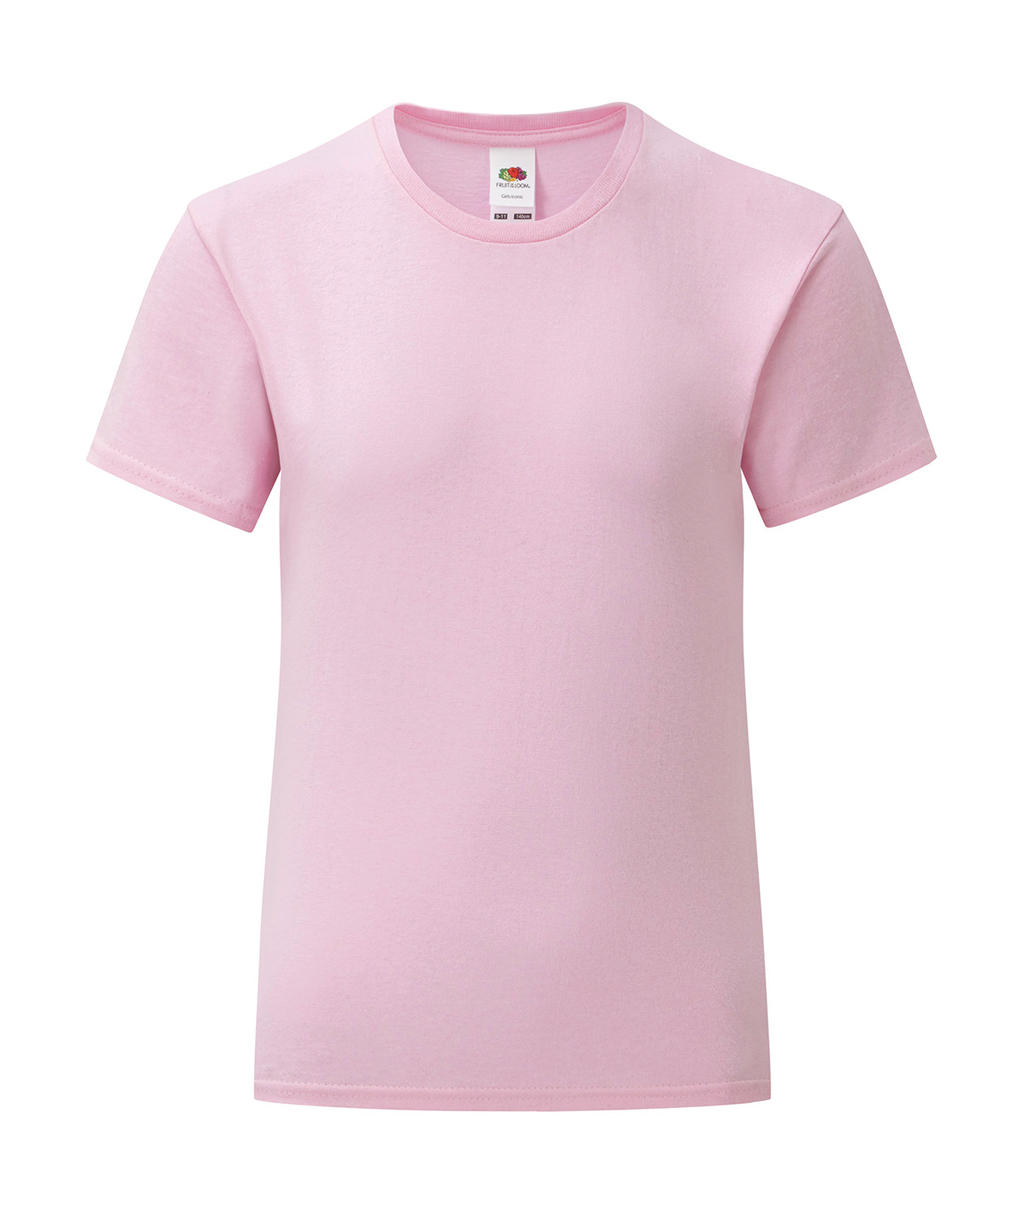  Girls Iconic 150 T in Farbe Light Pink